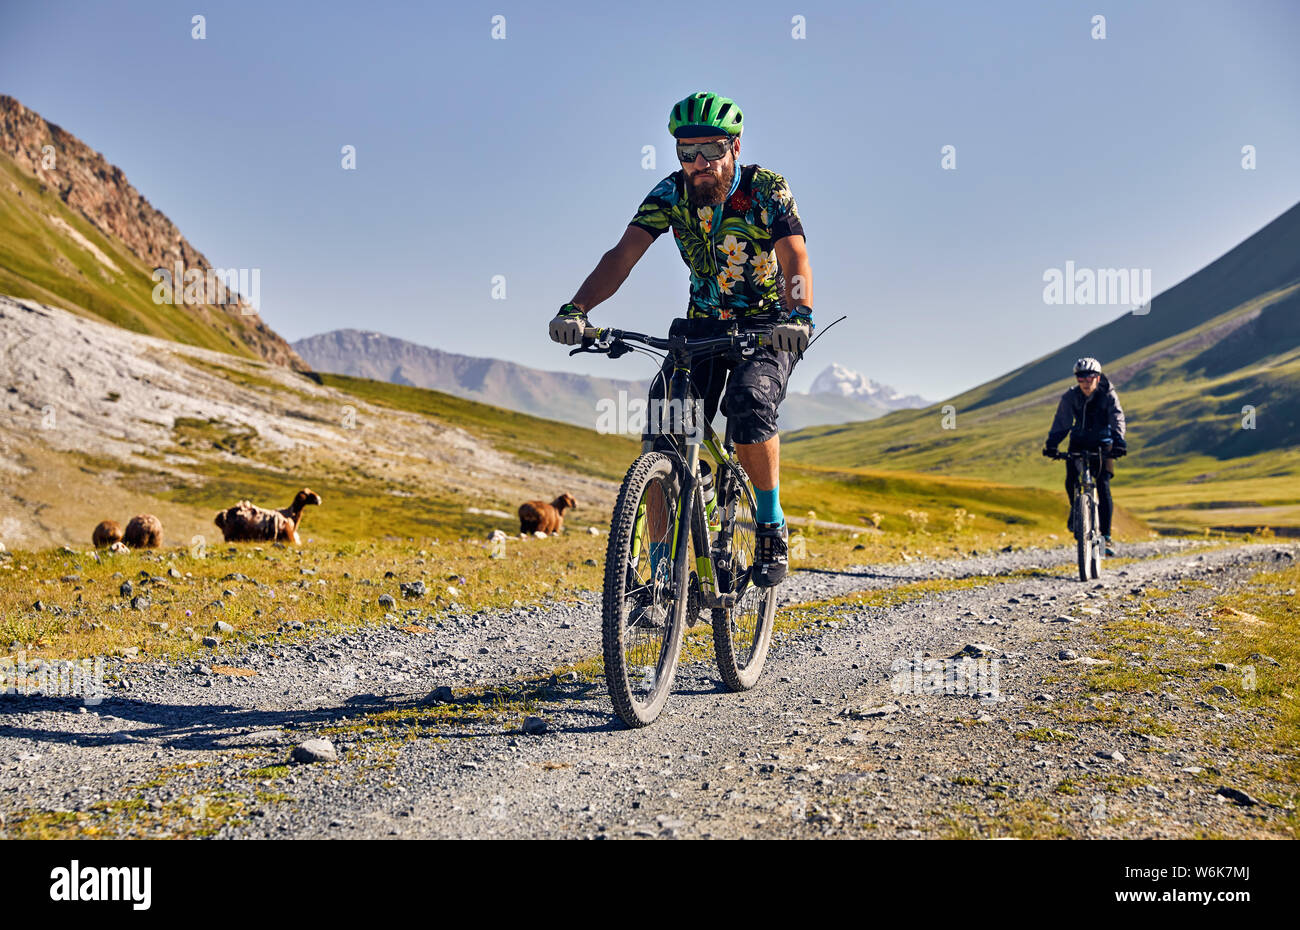 Man on mountain bike rides on the road with sheep and goats in the green mountain valley. Stock Photo